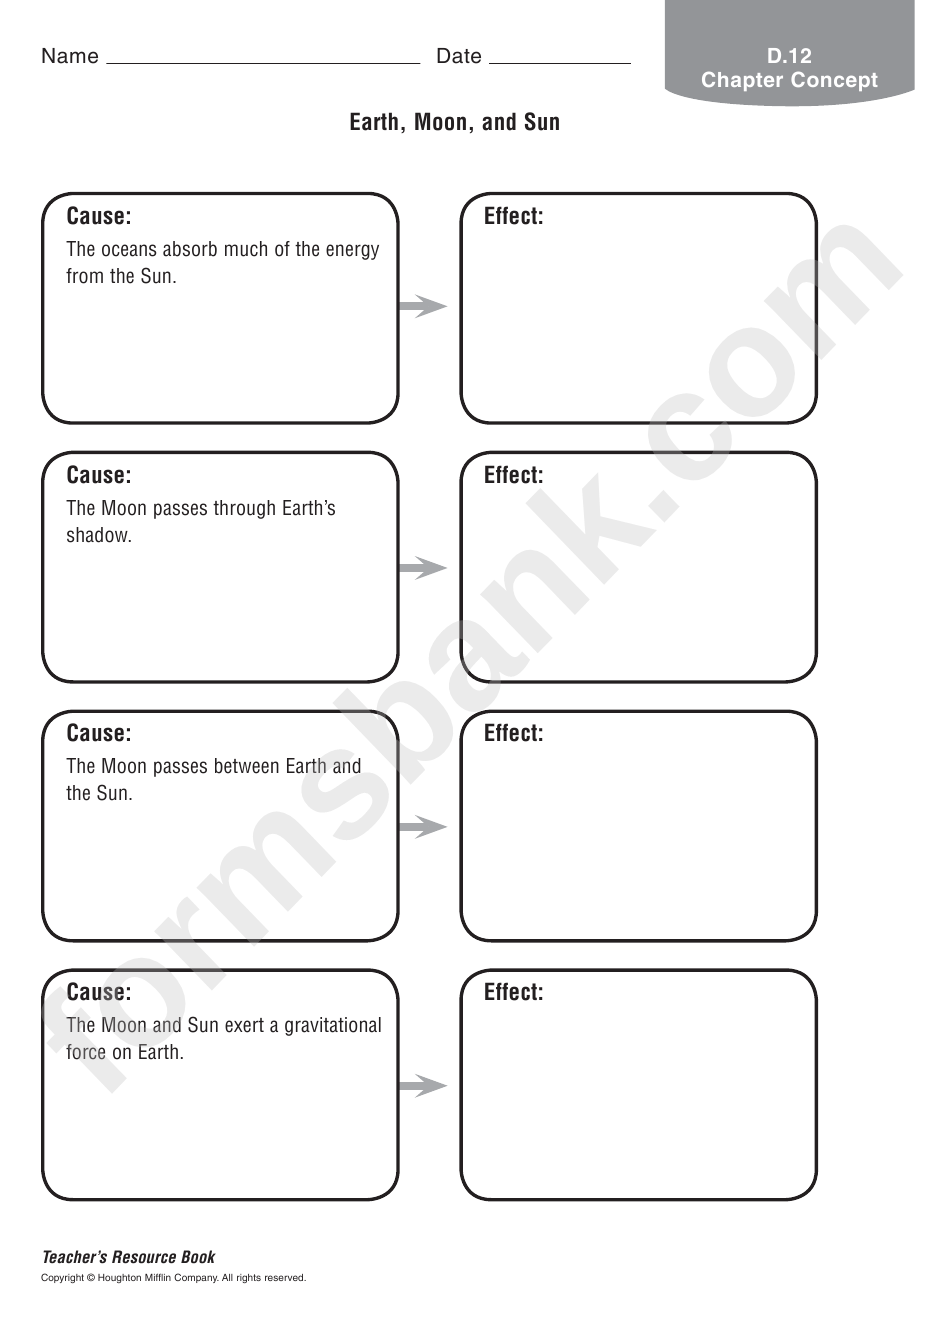 Science Worksheet - Earth, Moon, And Sun